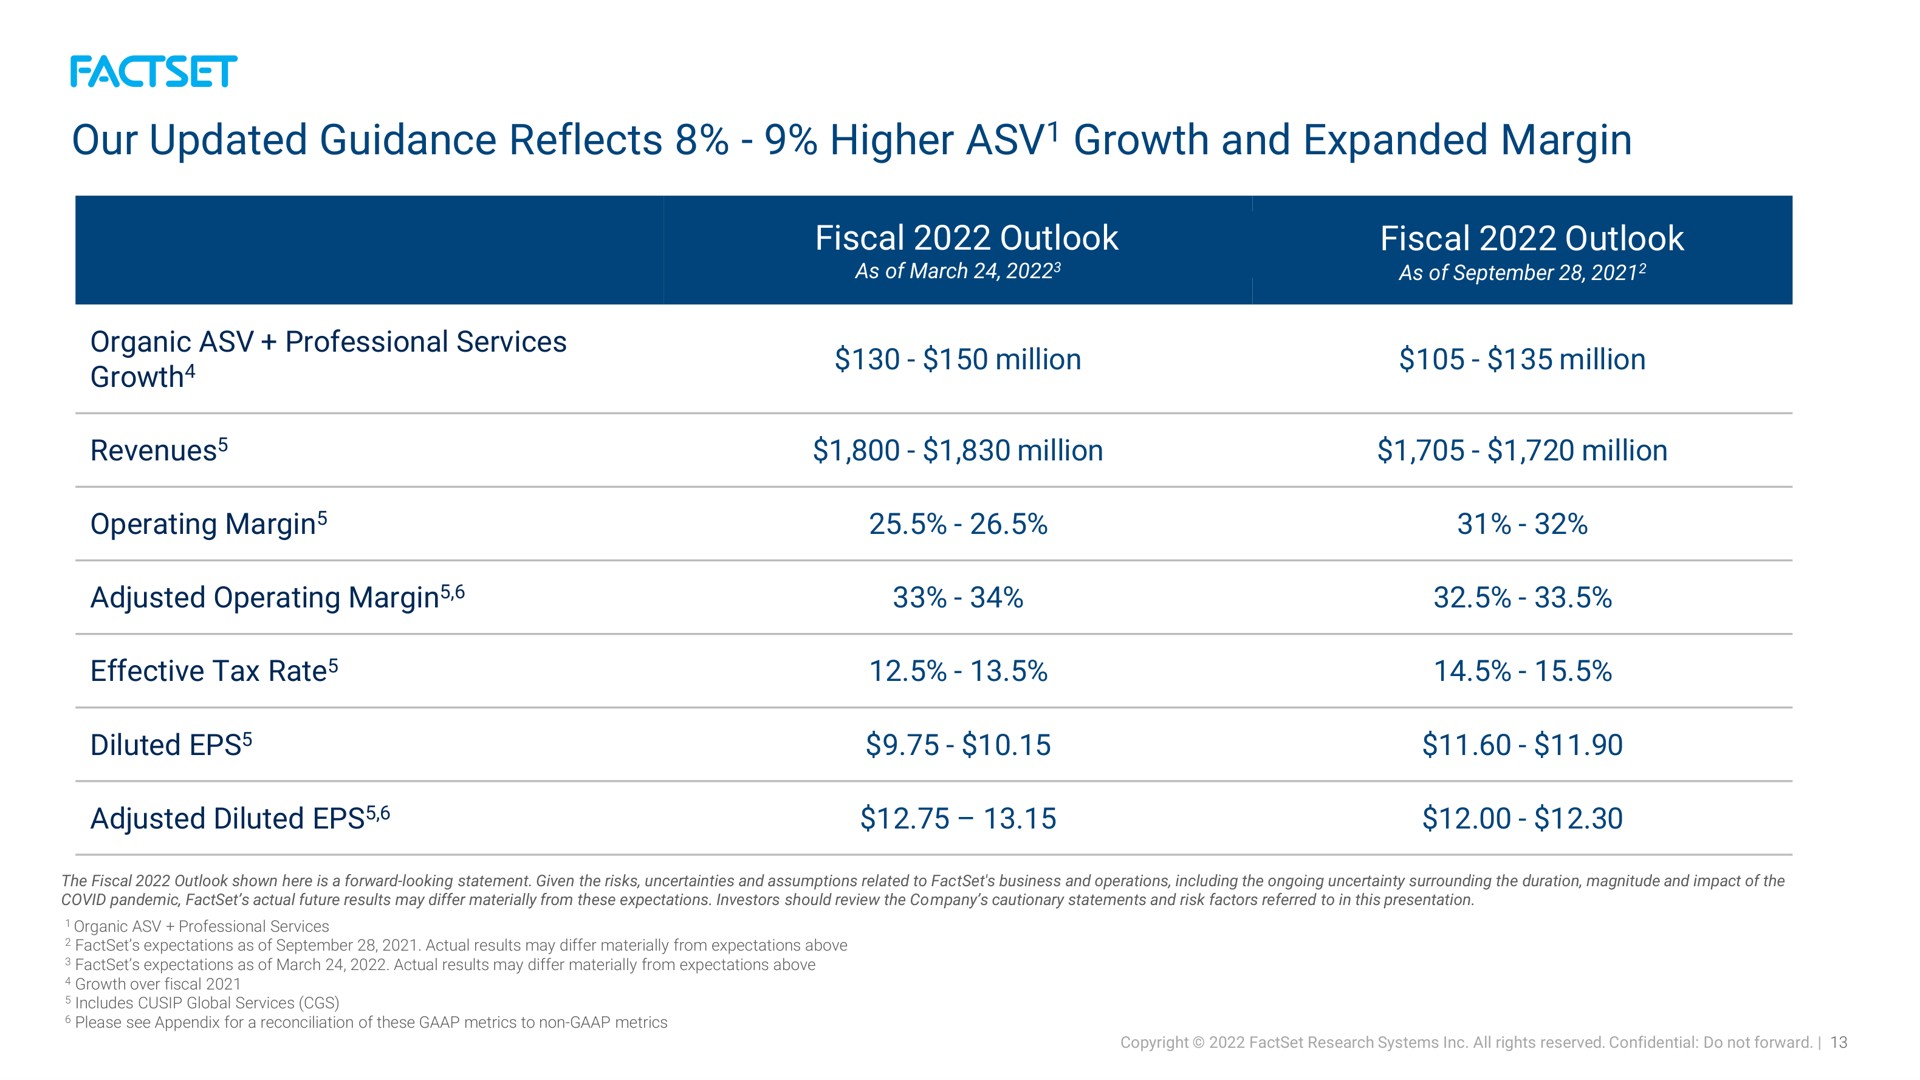 our updated guidance reflects higher growth and expanded margin | Factset